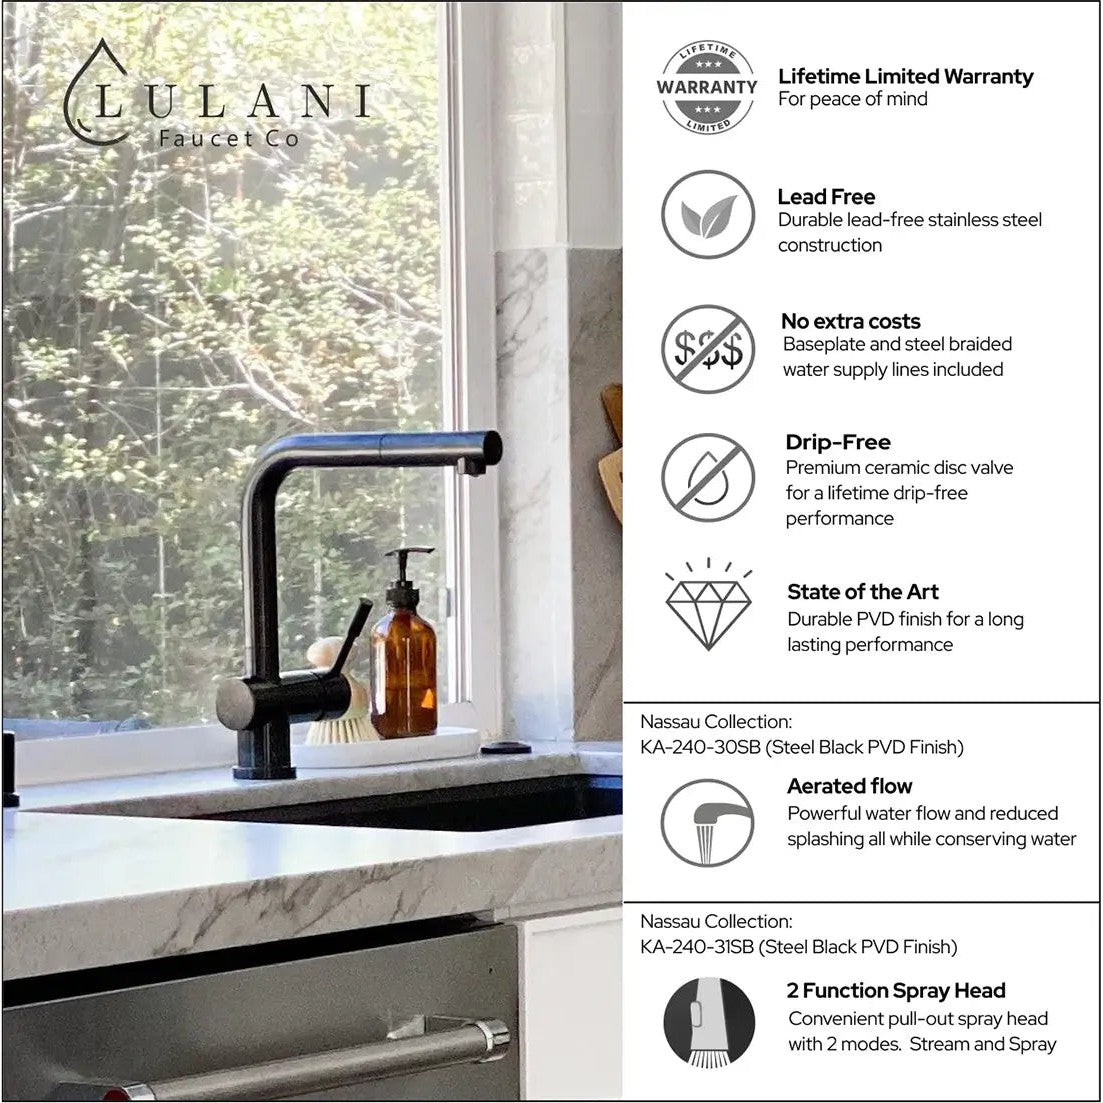 Lulani Nassau Steel Black PVD Finish 1.8 GPM 1-Handle Pull-Out Swivel Faucet With Baseplate